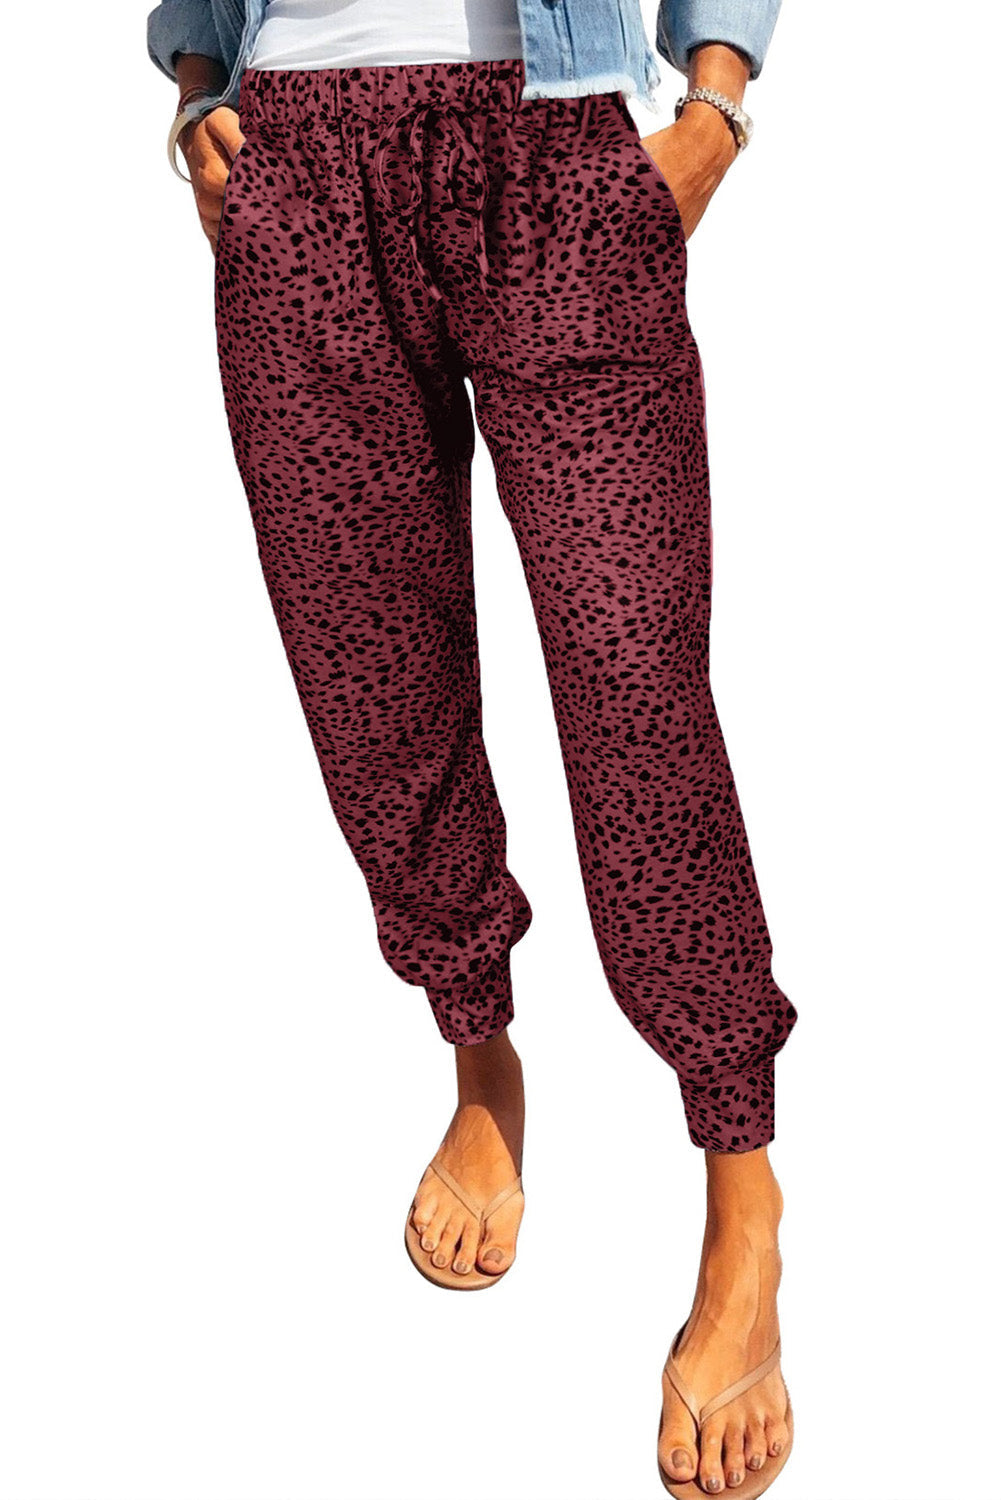 Leopard Print Joggers with Pockets - Bottoms - Pants - 14 - 2024